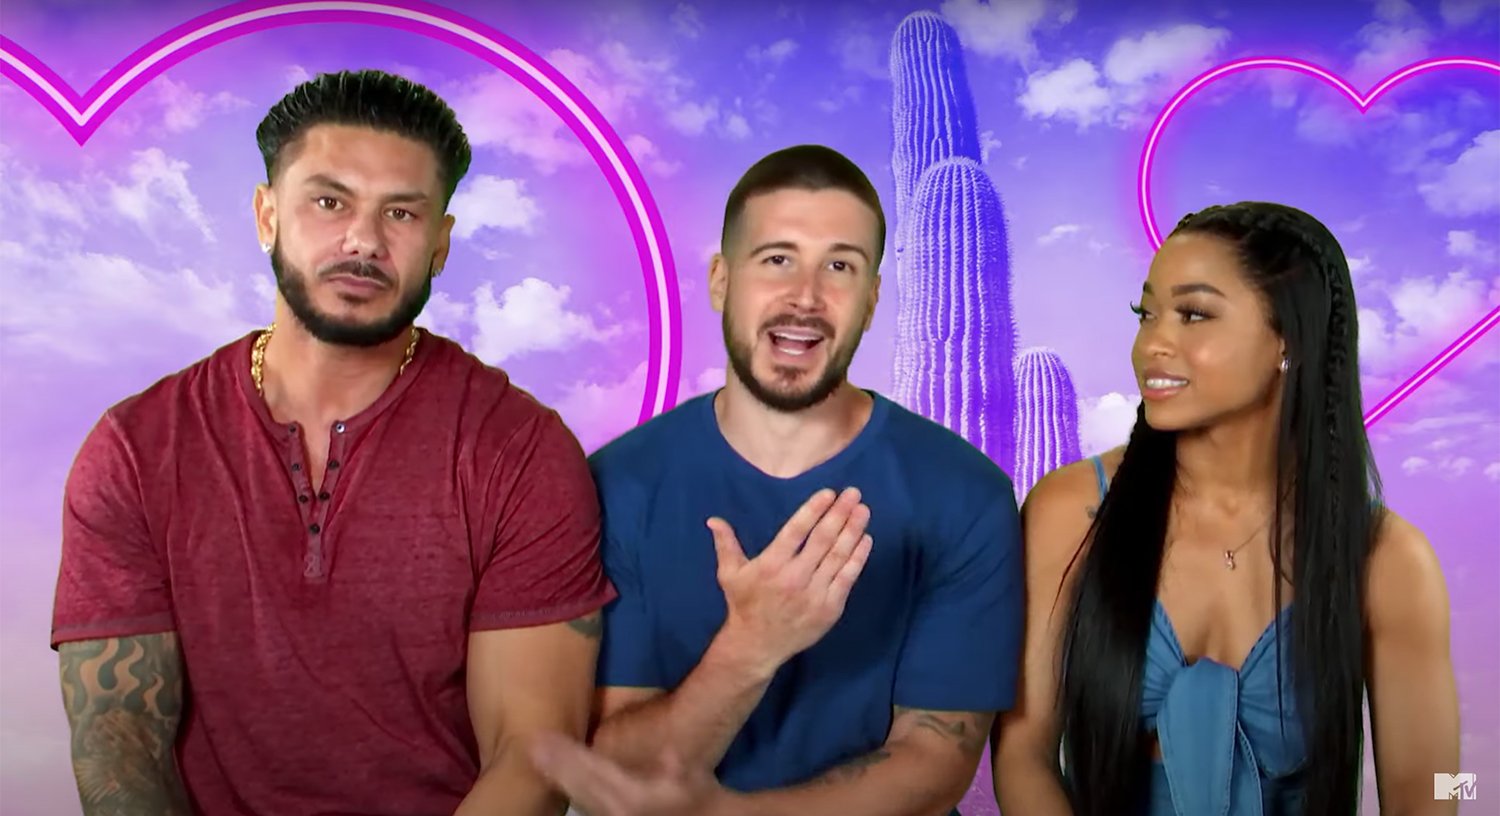 Pauly DelVecchio, Vinny Guadagnino, and Nikki Hall talk to the camera with a green screen image behind them for 'Double Shot at Love' Season 3